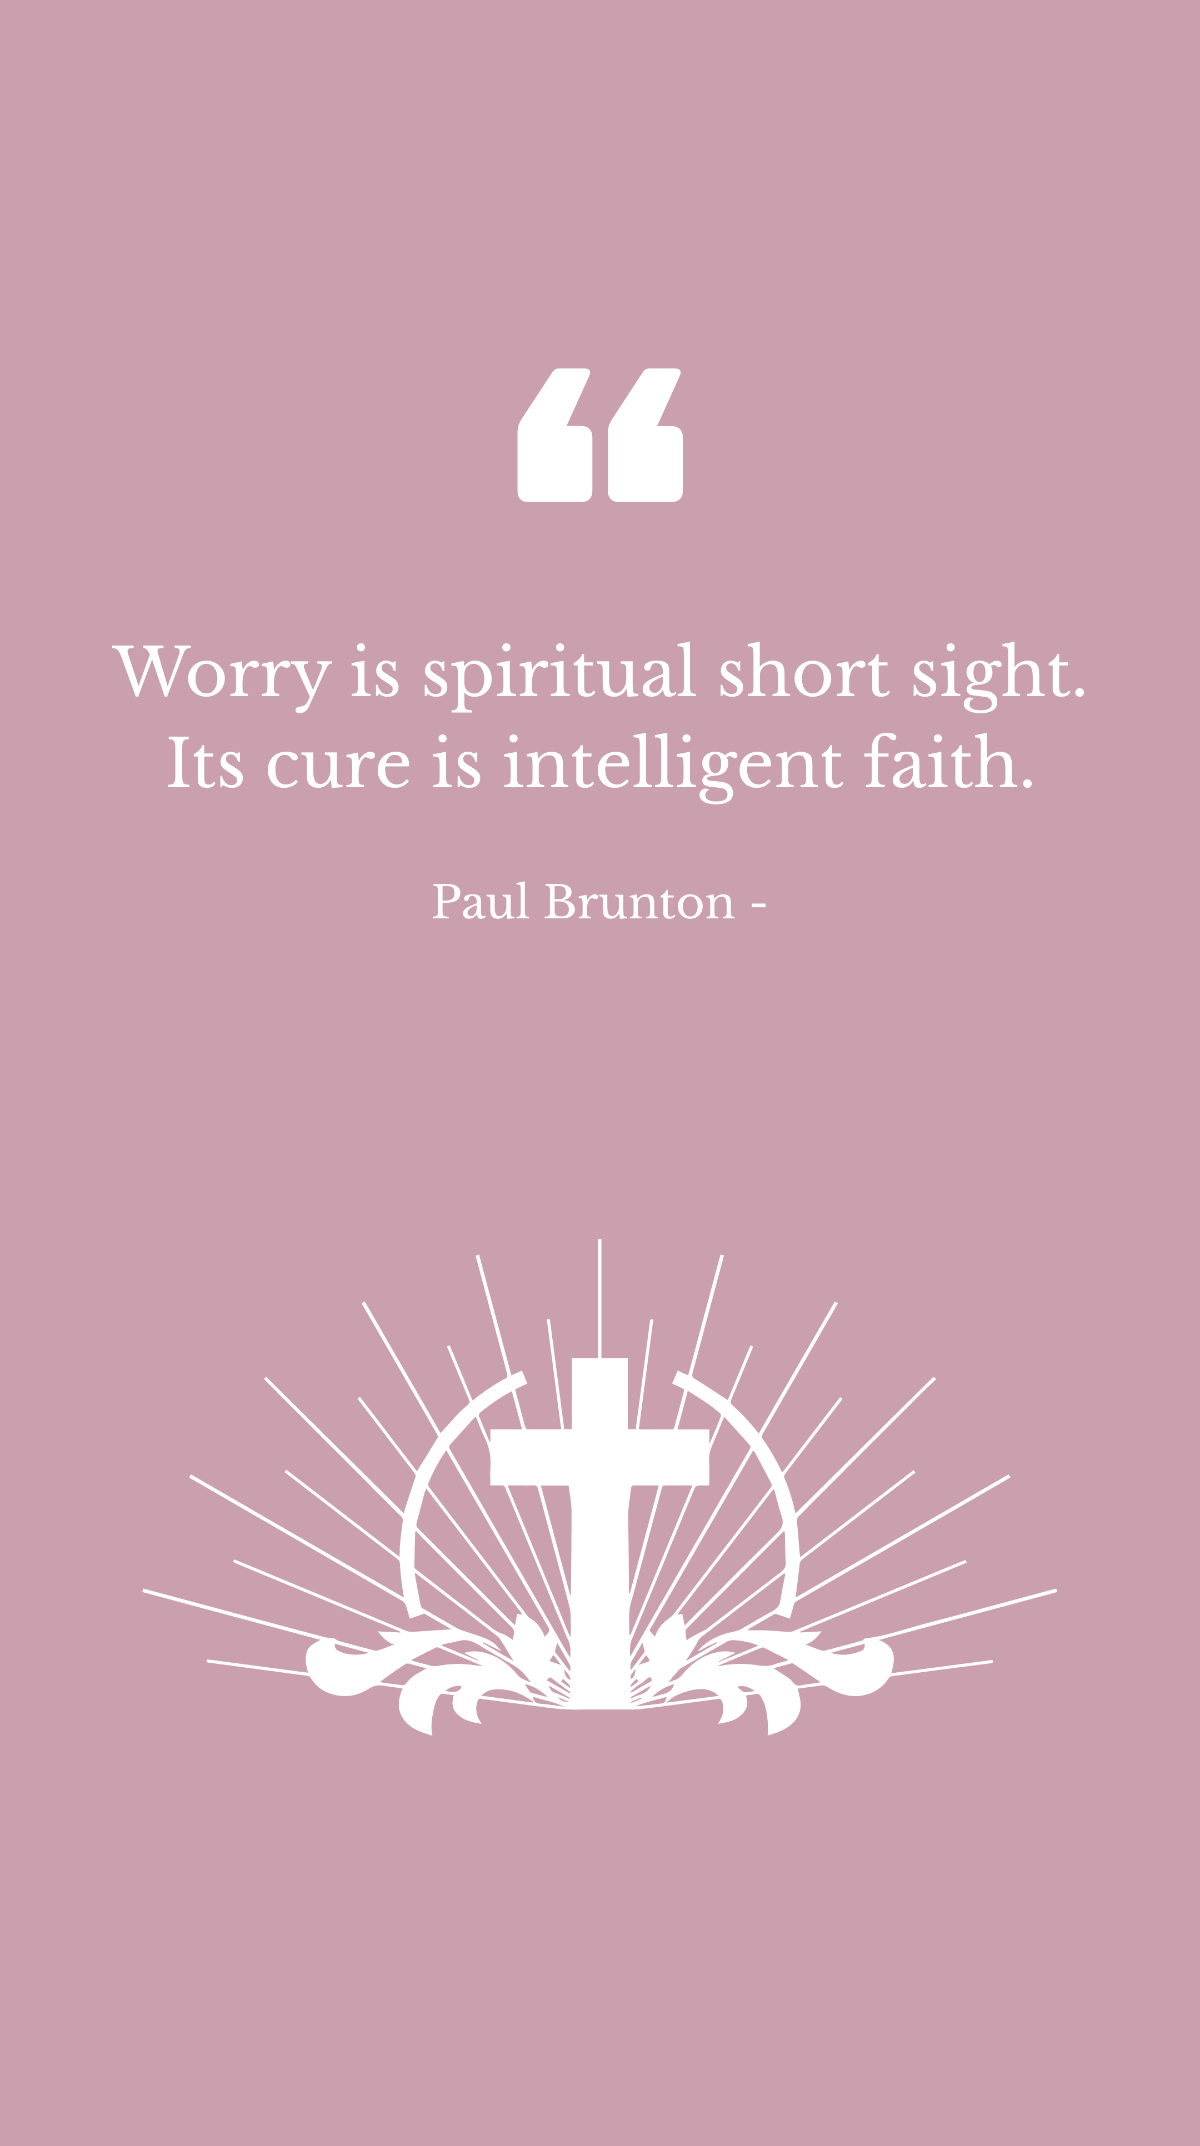 Free Paul Brunton - Worry is spiritual short sight. Its cure is intelligent faith. Template